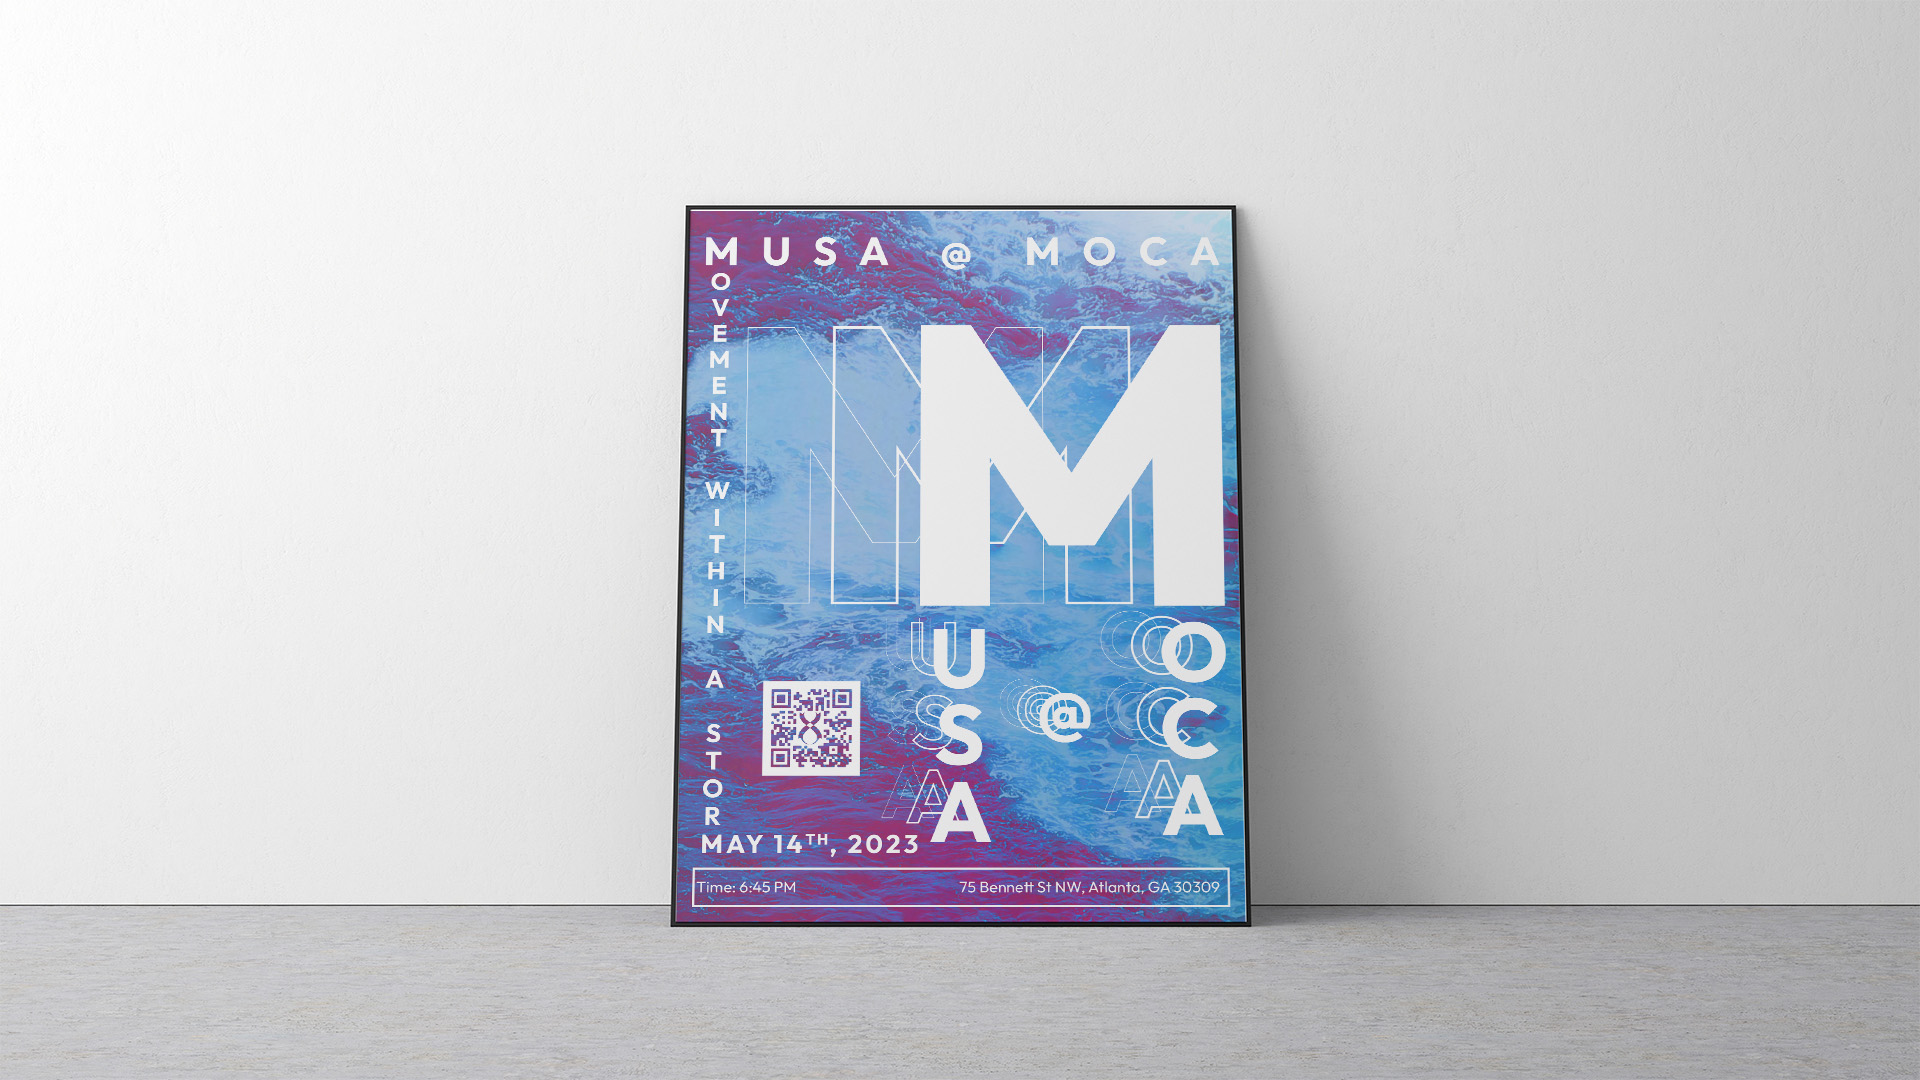 Musa Figueroa / Musa X MOCA Poster, 11x17, Printed Poster, 2023

This poster is the potential exhibit of me artist Musa Figueroa, being given the chance to show off my work at the Museum of Contemporary Art here in Atlanta, GA.